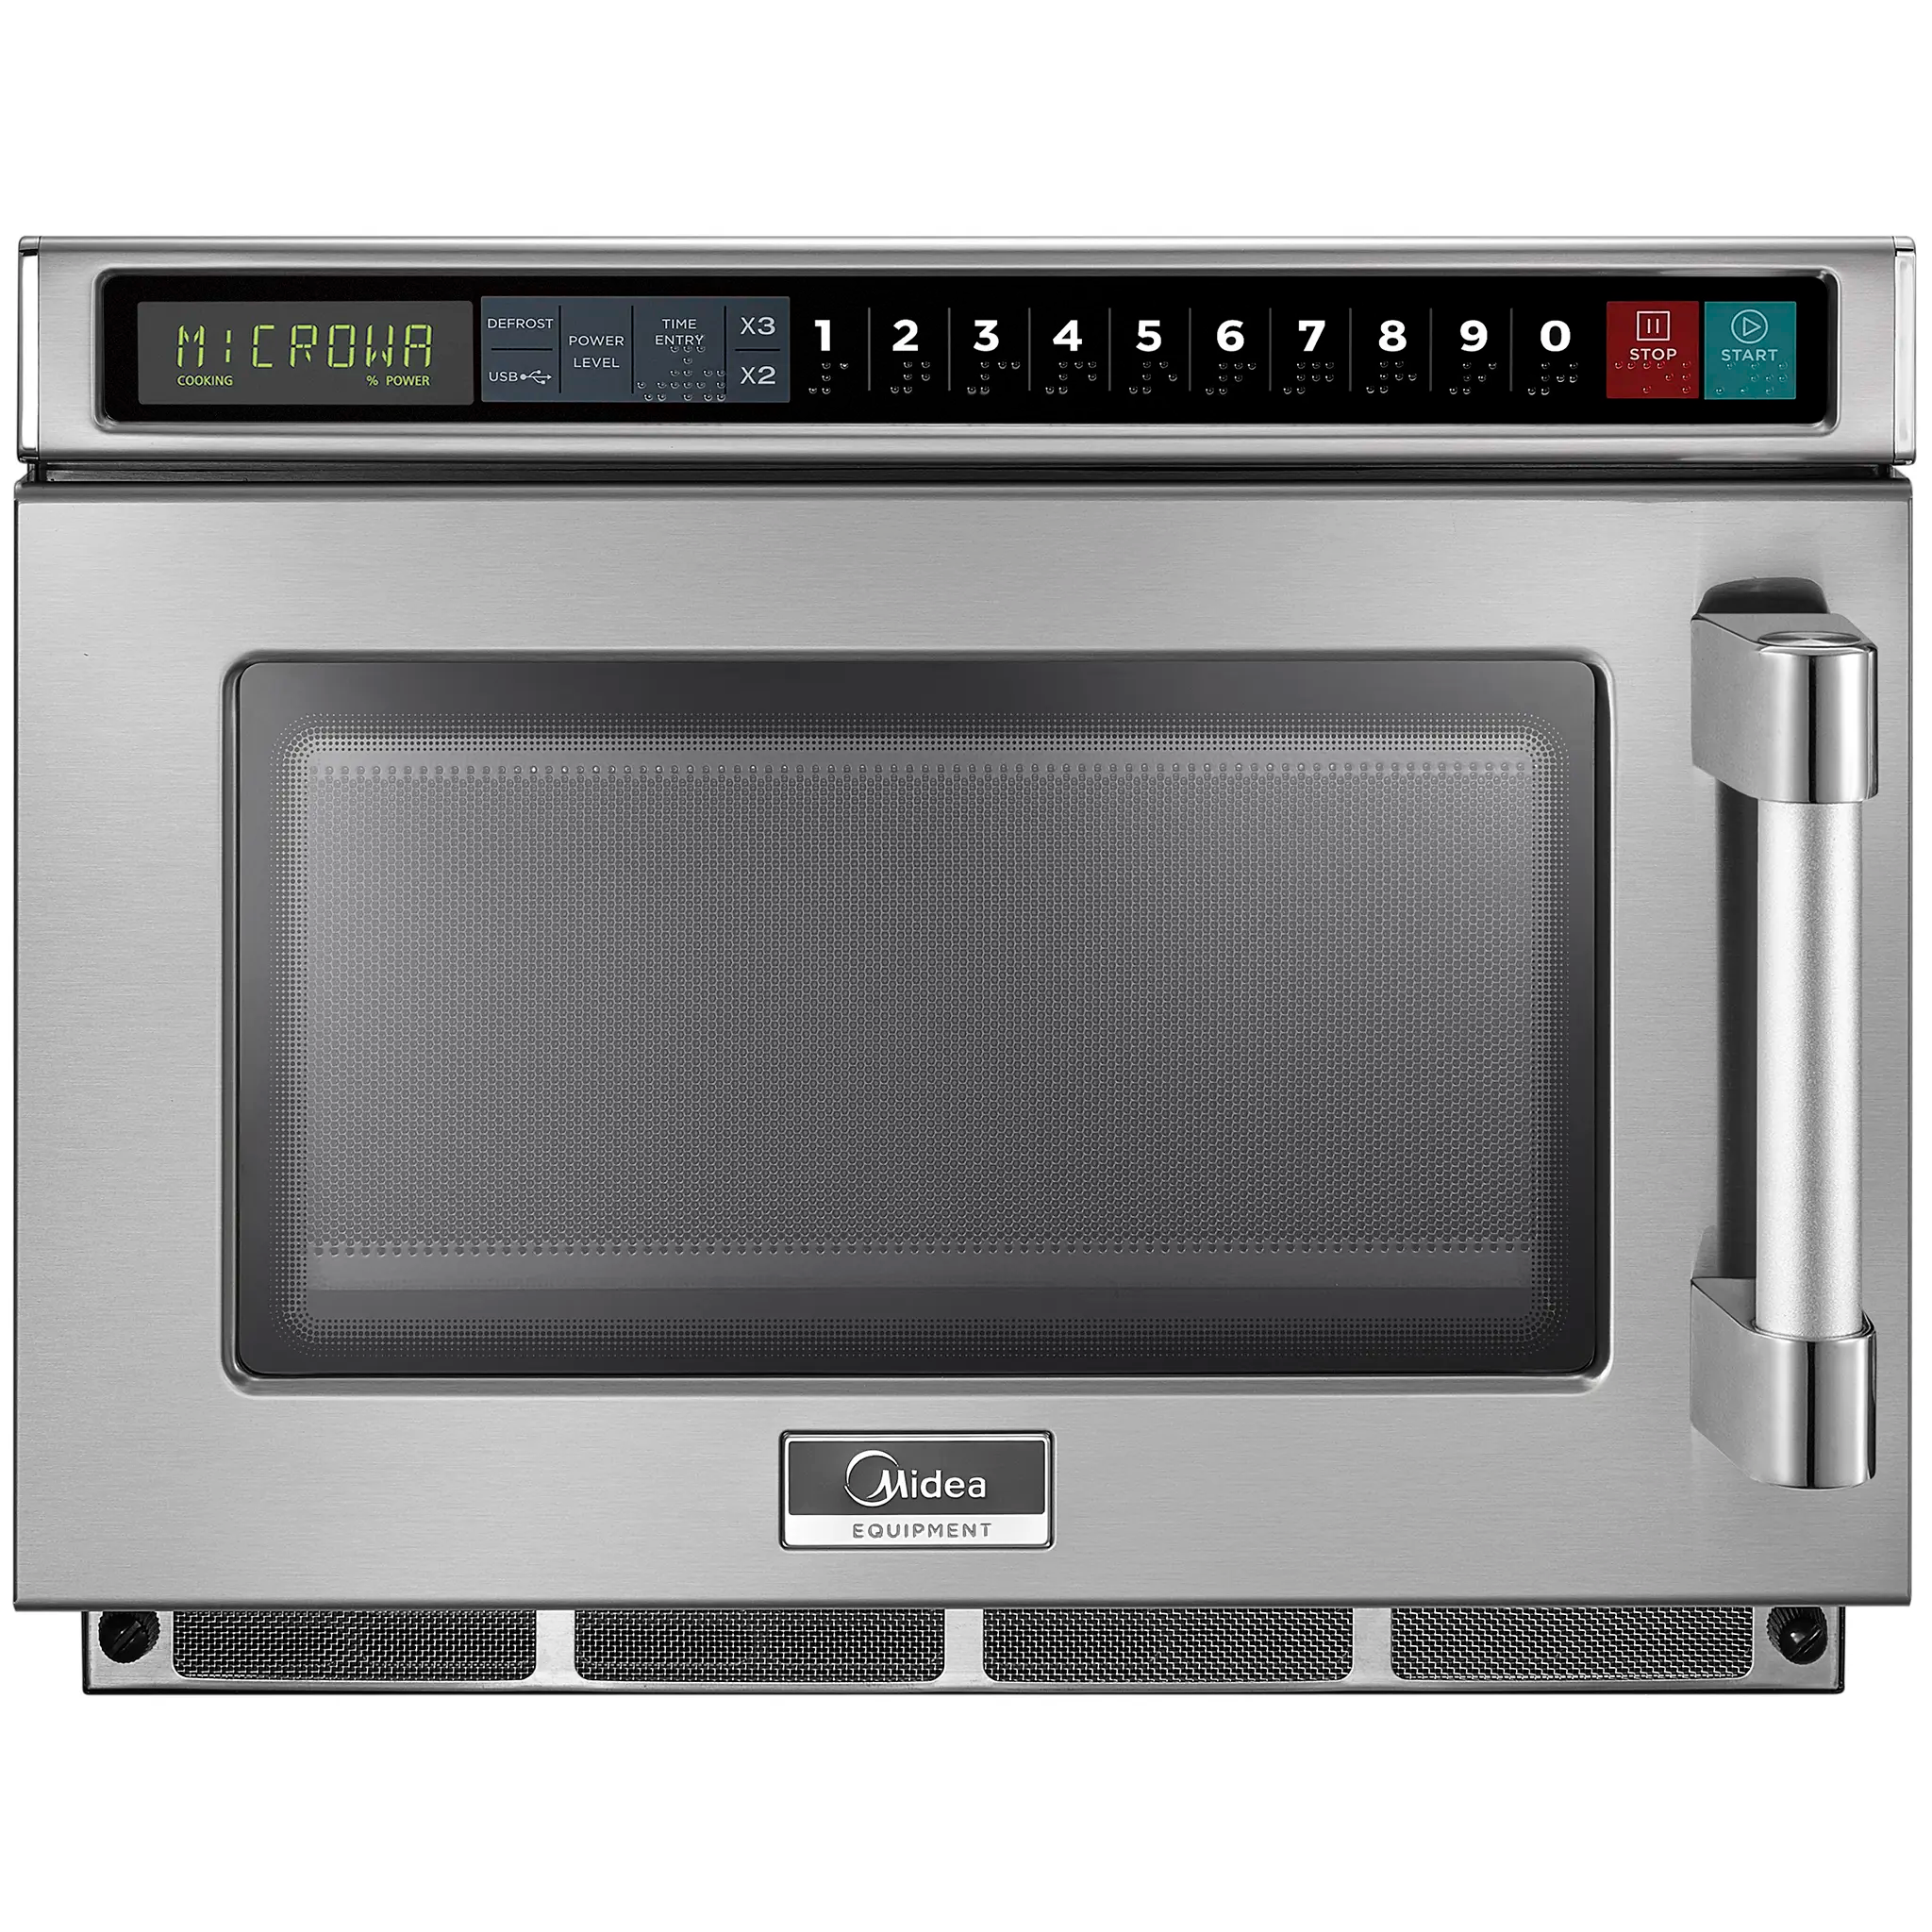 Midea 1817G1A Commercial Compact Touchpad Microwave with Filter - 1800W, Fits 13